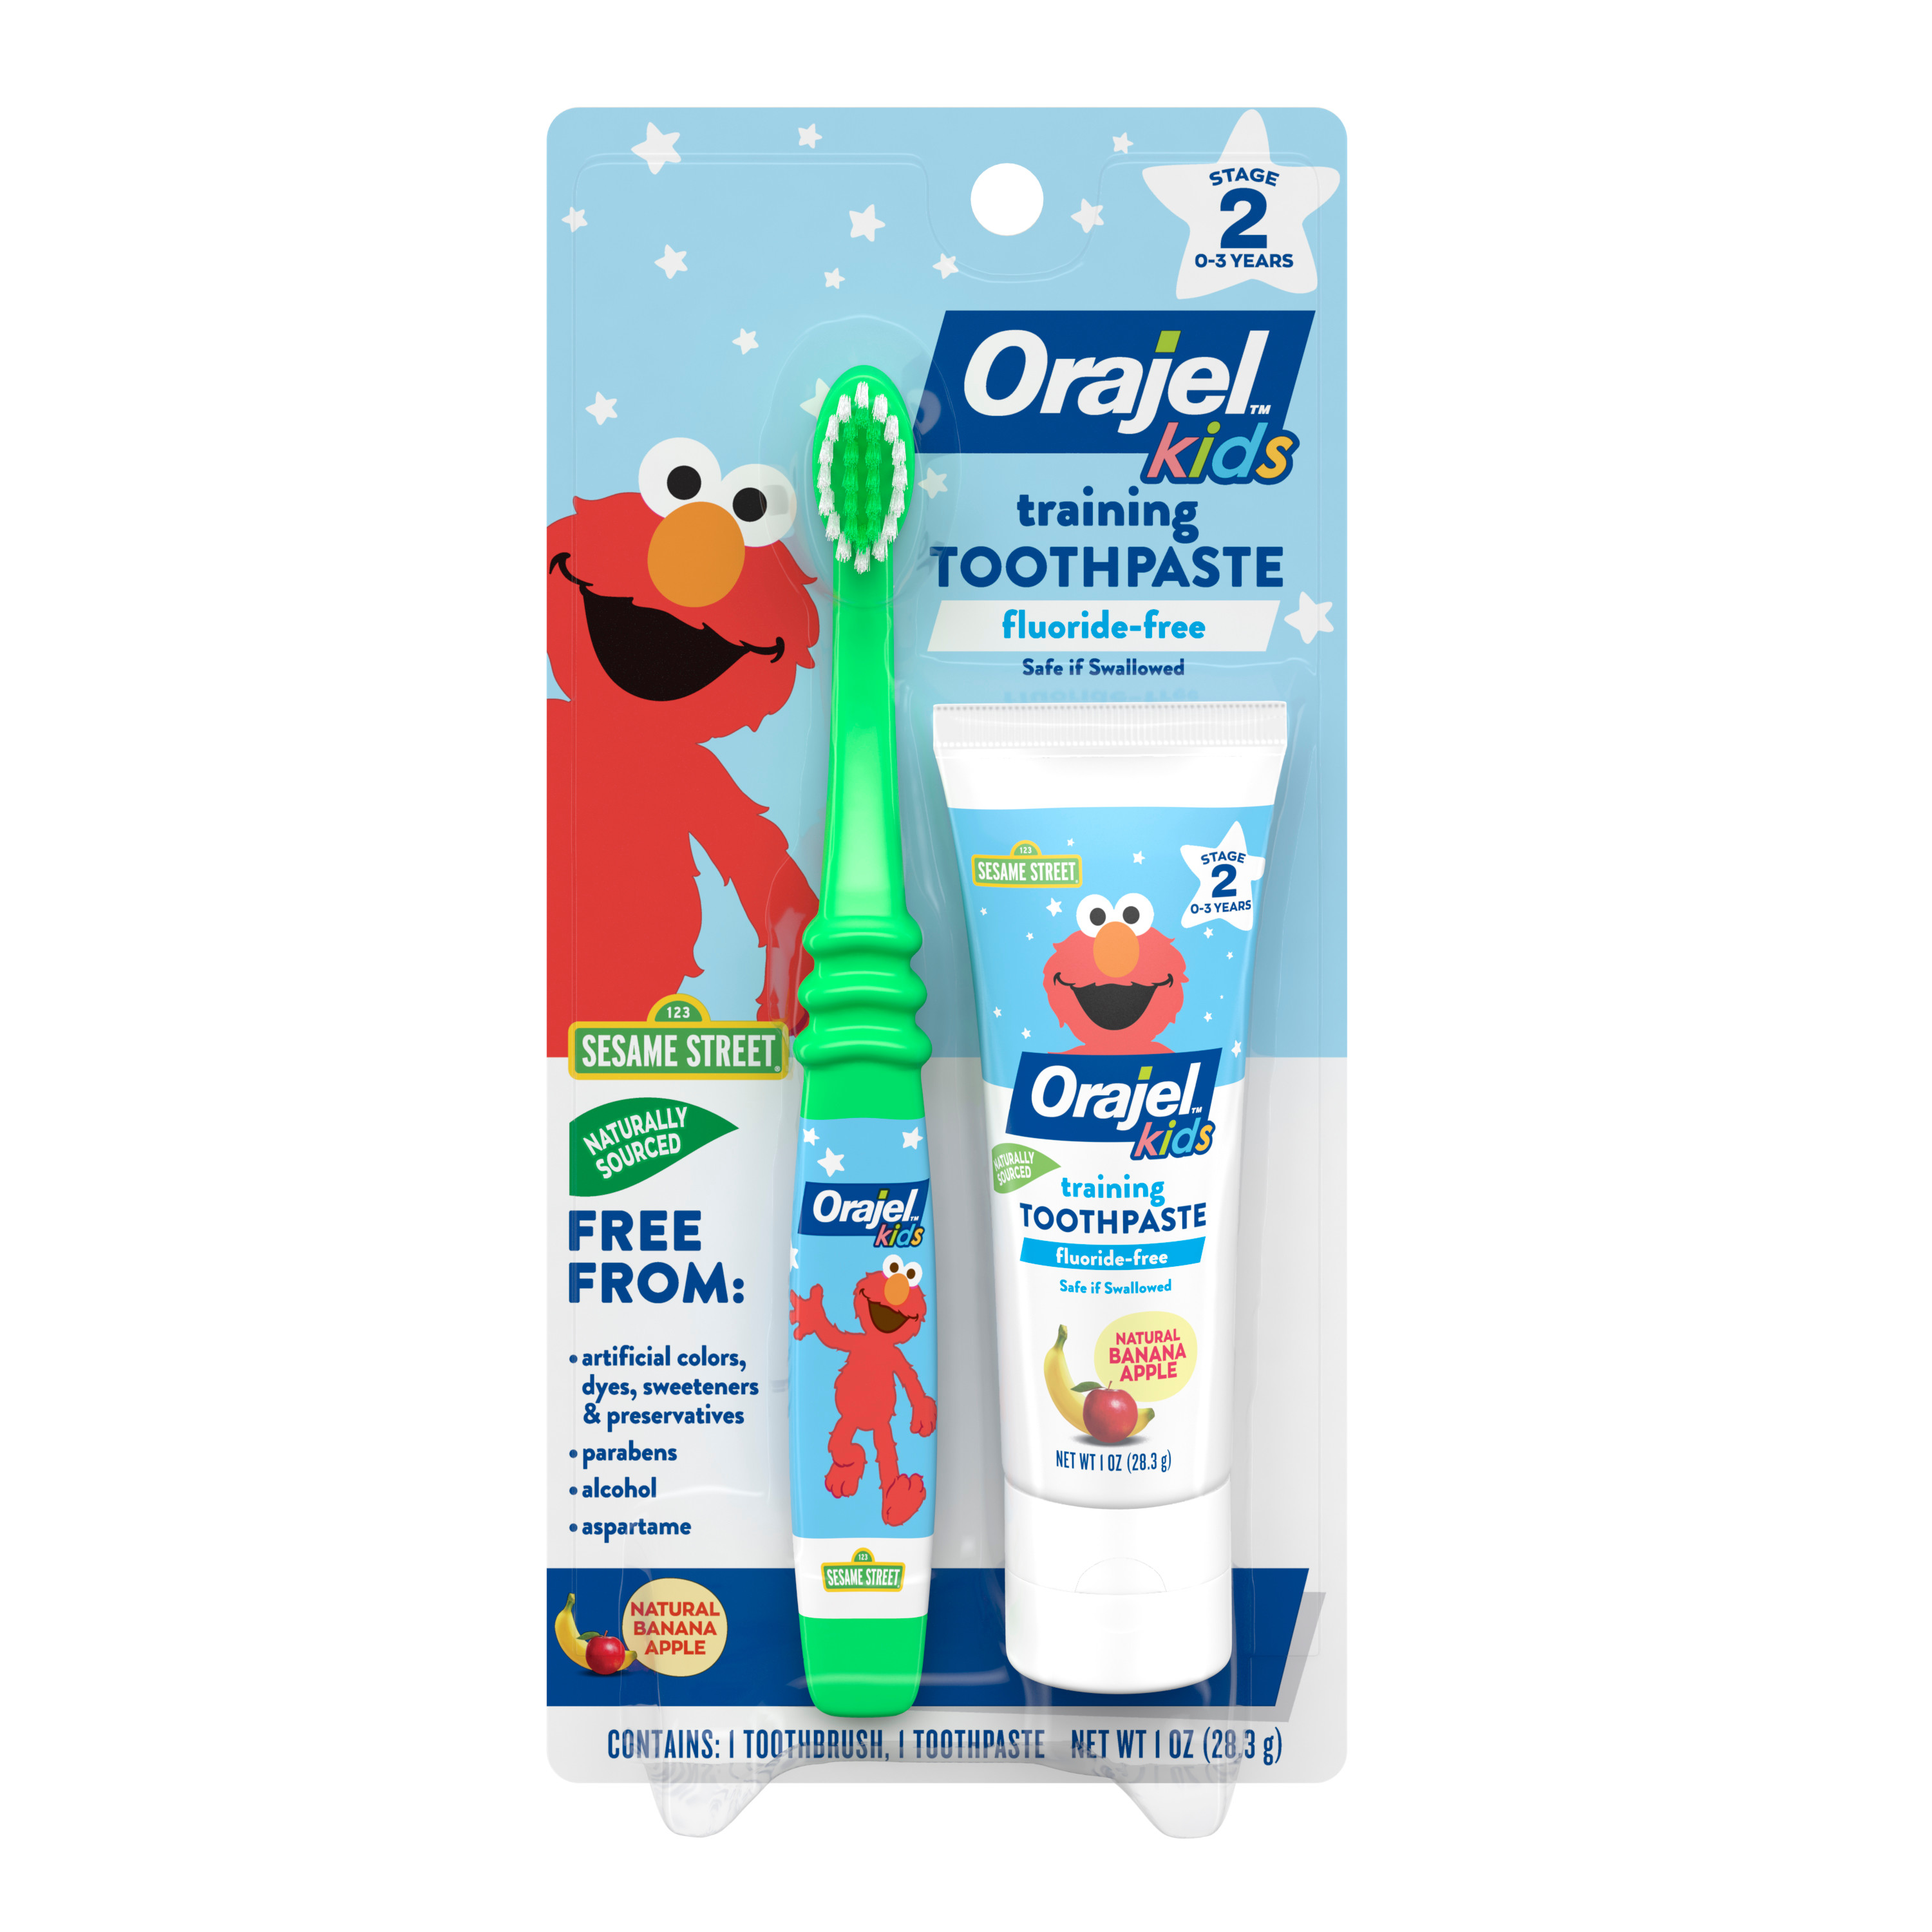 Orajel Kids Elmo Training Toothpaste for Infant and Toddlers, Fluoride-Free, 1 Toothbrush, 1 oz Toothpaste - image 1 of 7